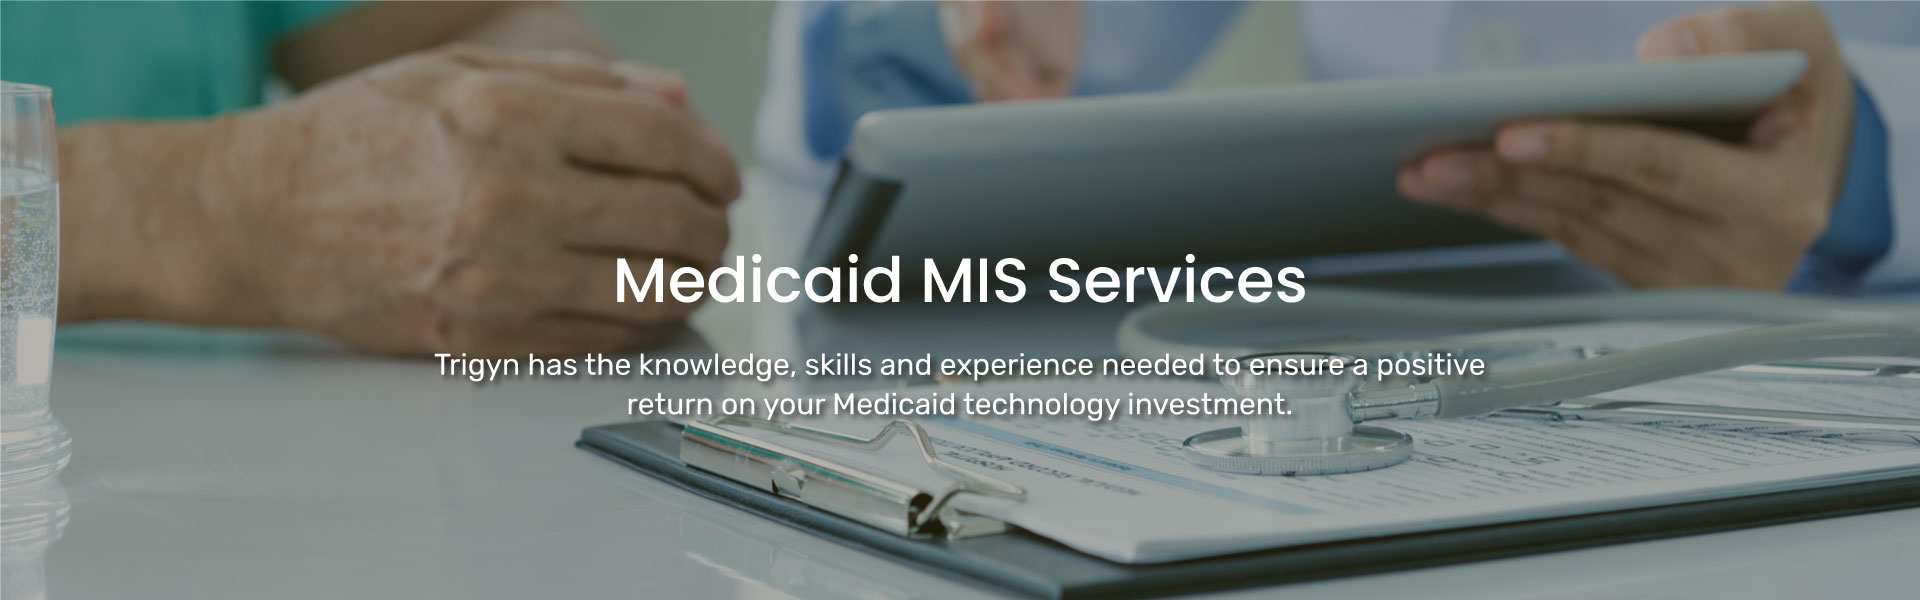 Trigyn's Medicaid MIS Services